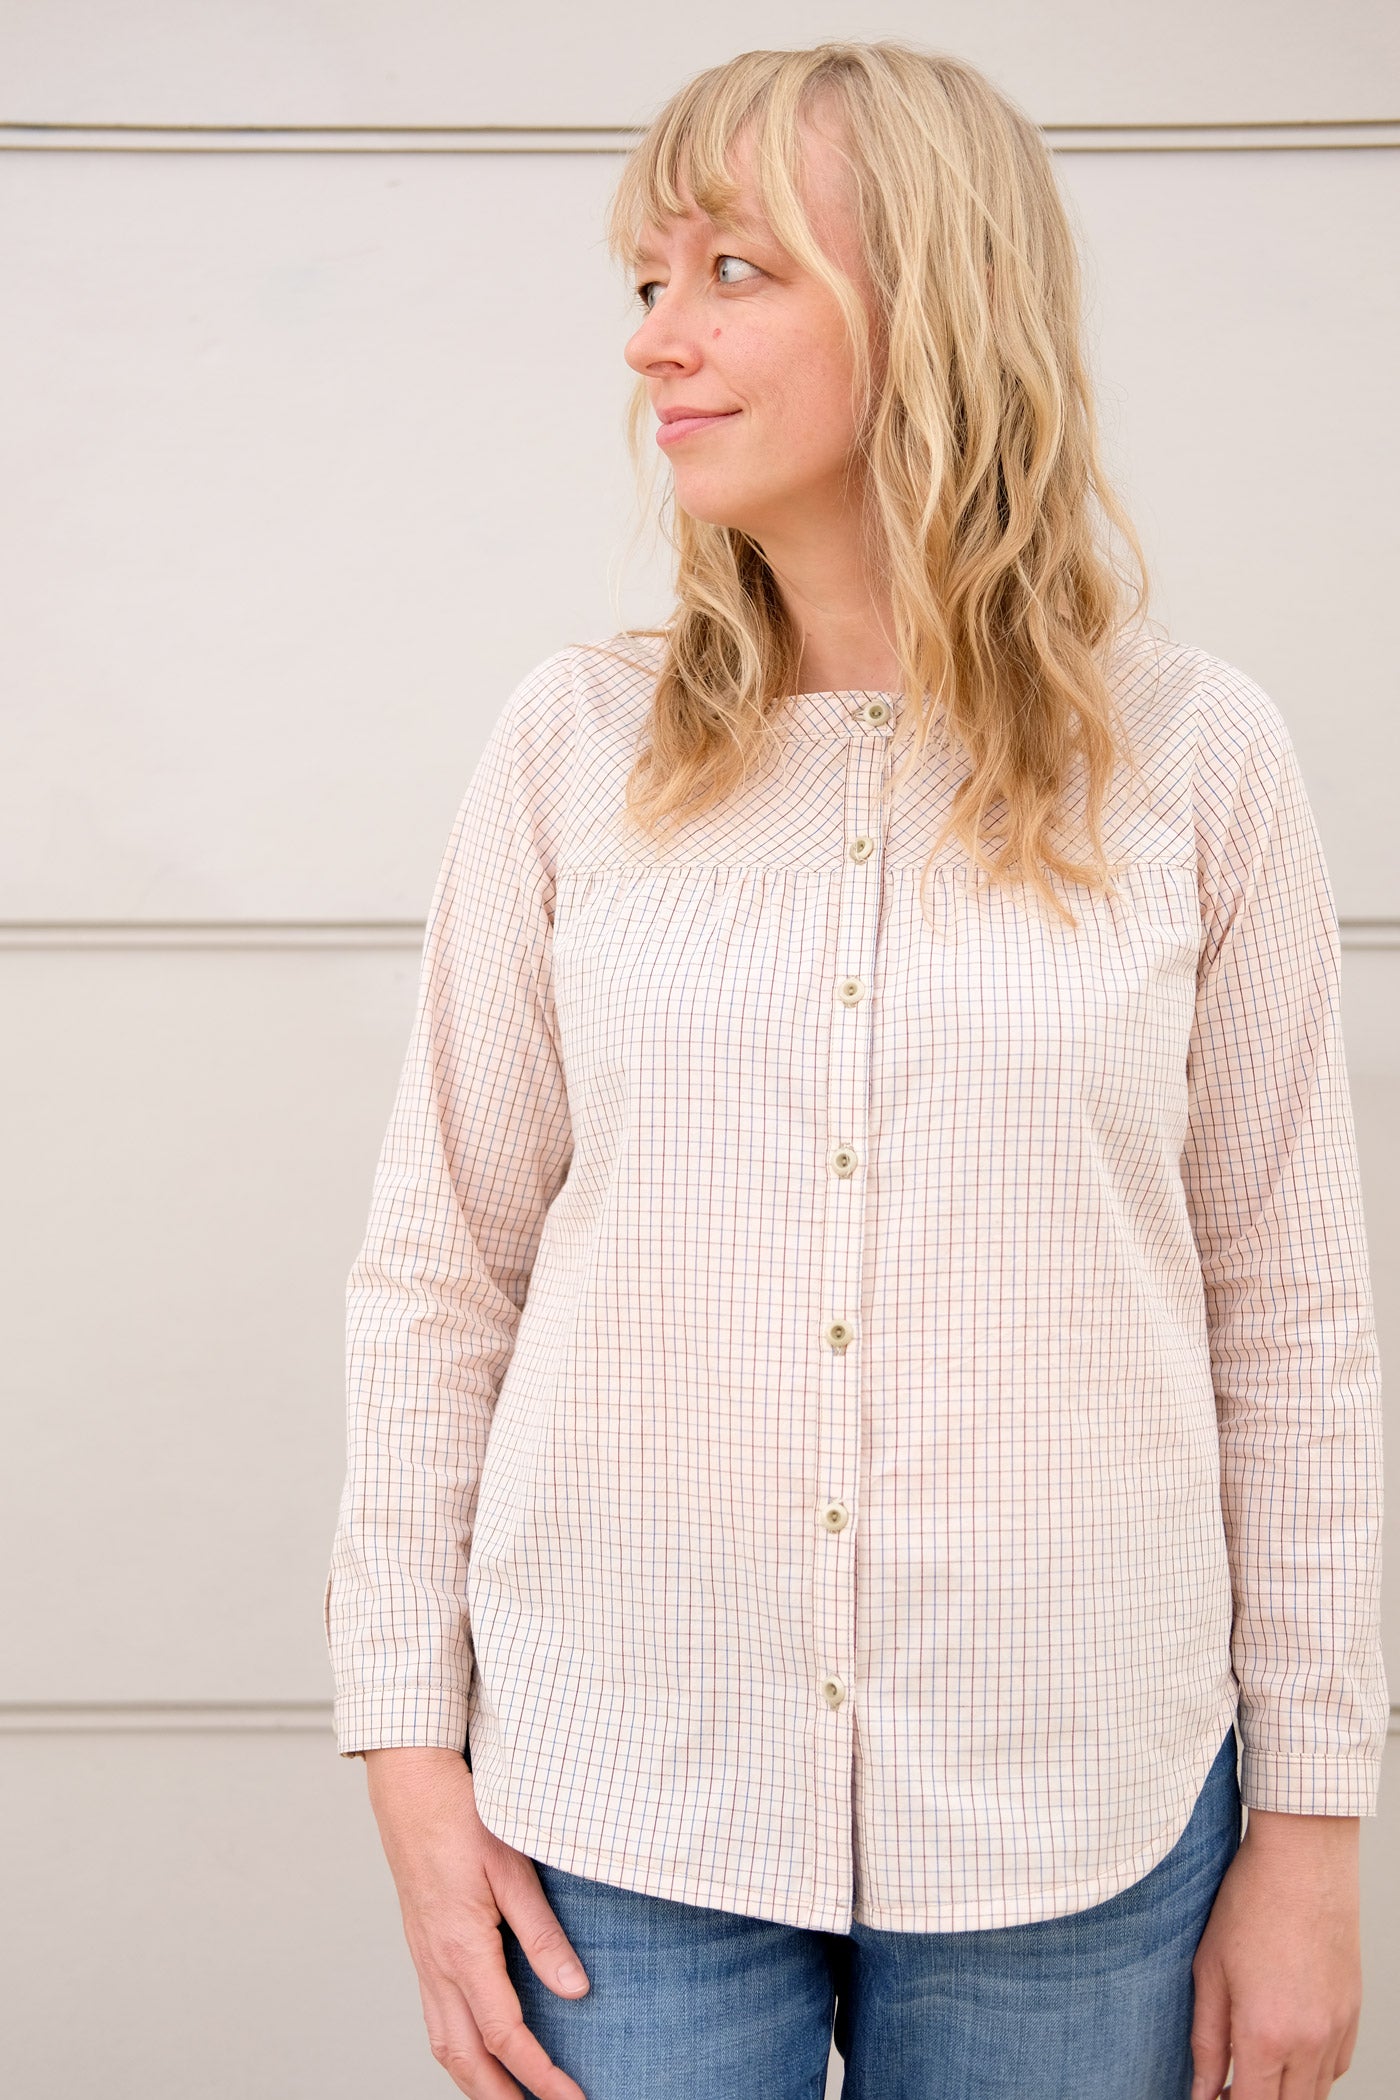 Woman wearing a button up shirt in a very pale peach, subtle plaid, standing in front of an off-white wall. The shirt is a gently gathered at the yoke, long sleeved and has a minimal band collar.  